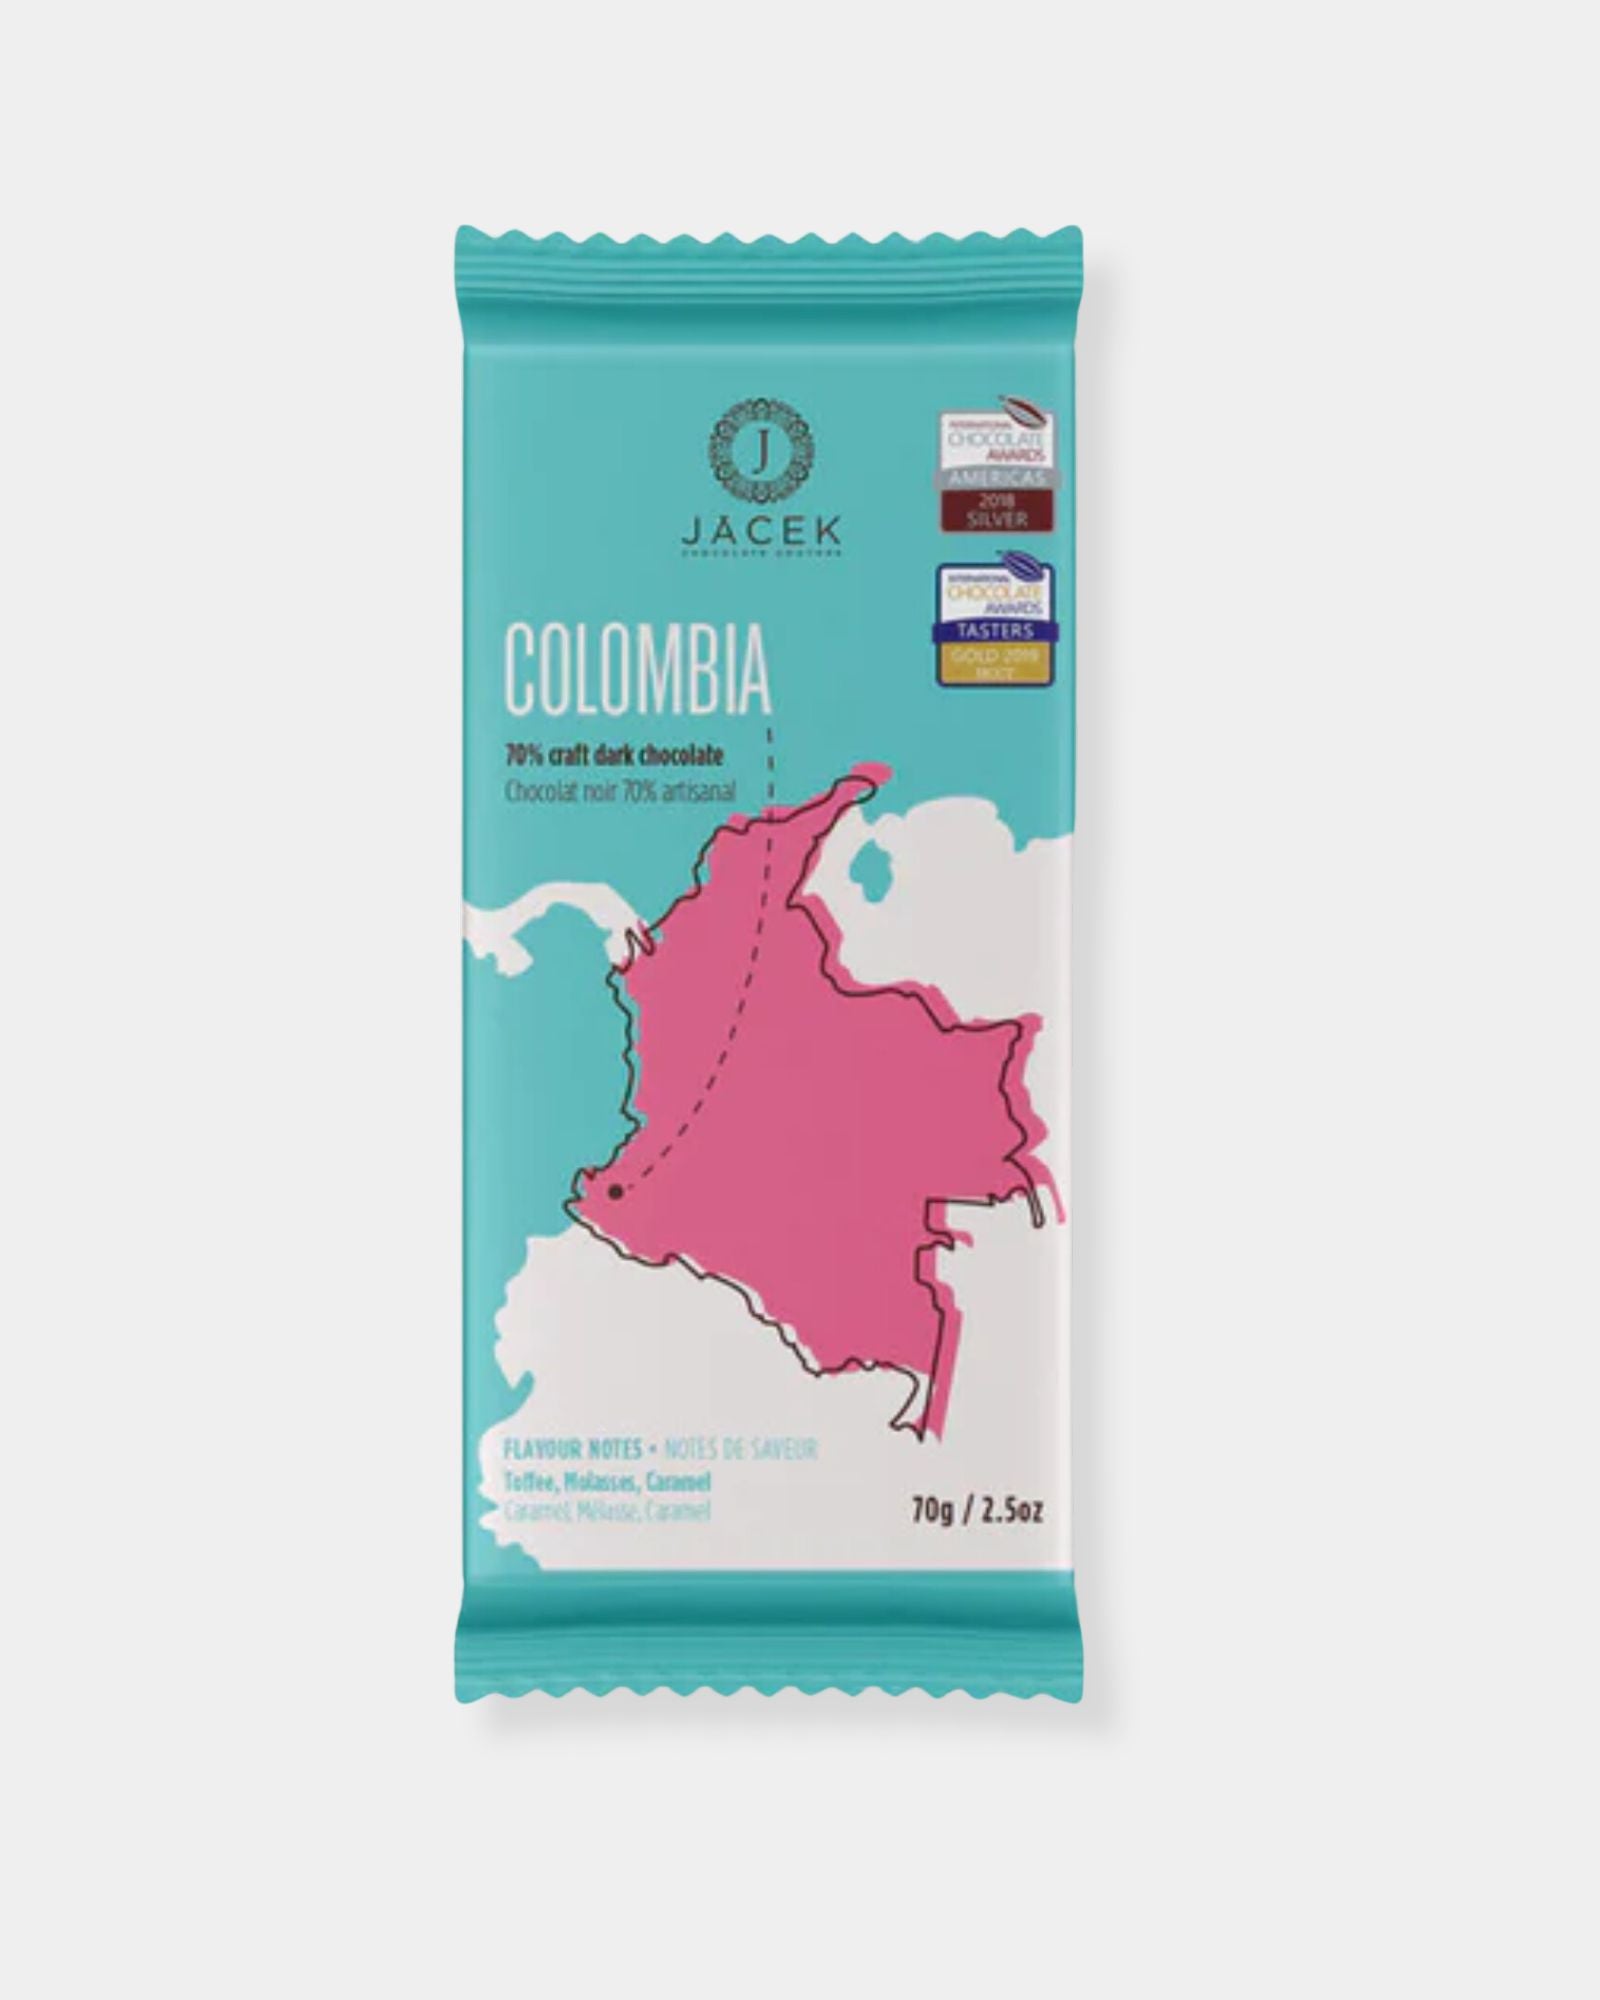 COLOMBIA 70% BAR - 70G - 004653398